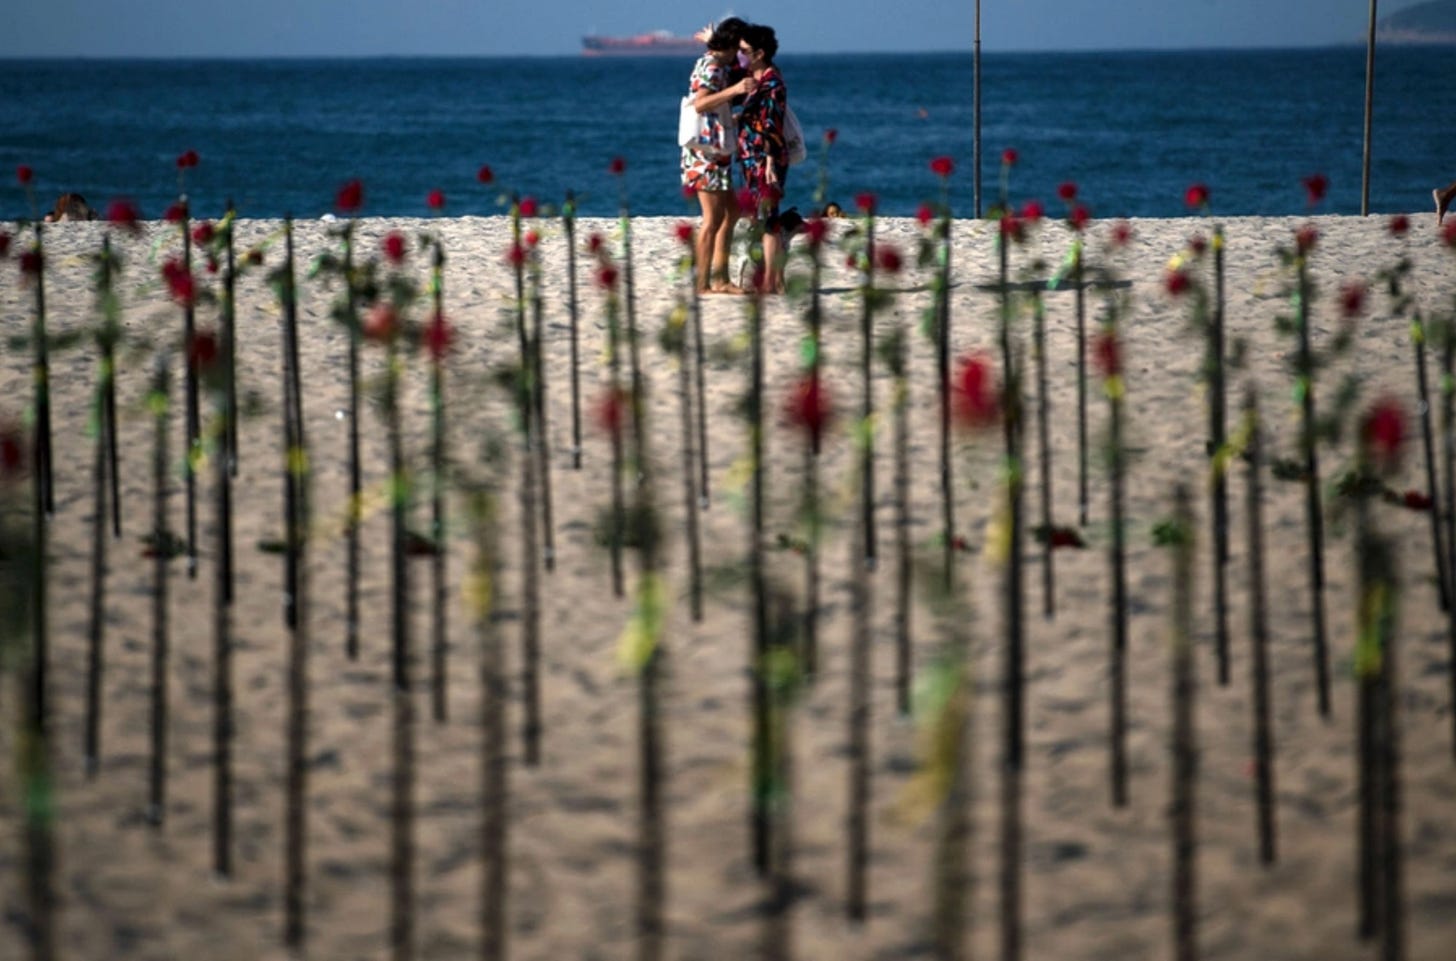 Two peopple talk on Copacabana beach, Rio de Janeiro. In the foreground, rows of single red roses have been stood upright in the sand in memory of Covid victims. A cargo ship passes at the horizon line behind the people, further out to sea.